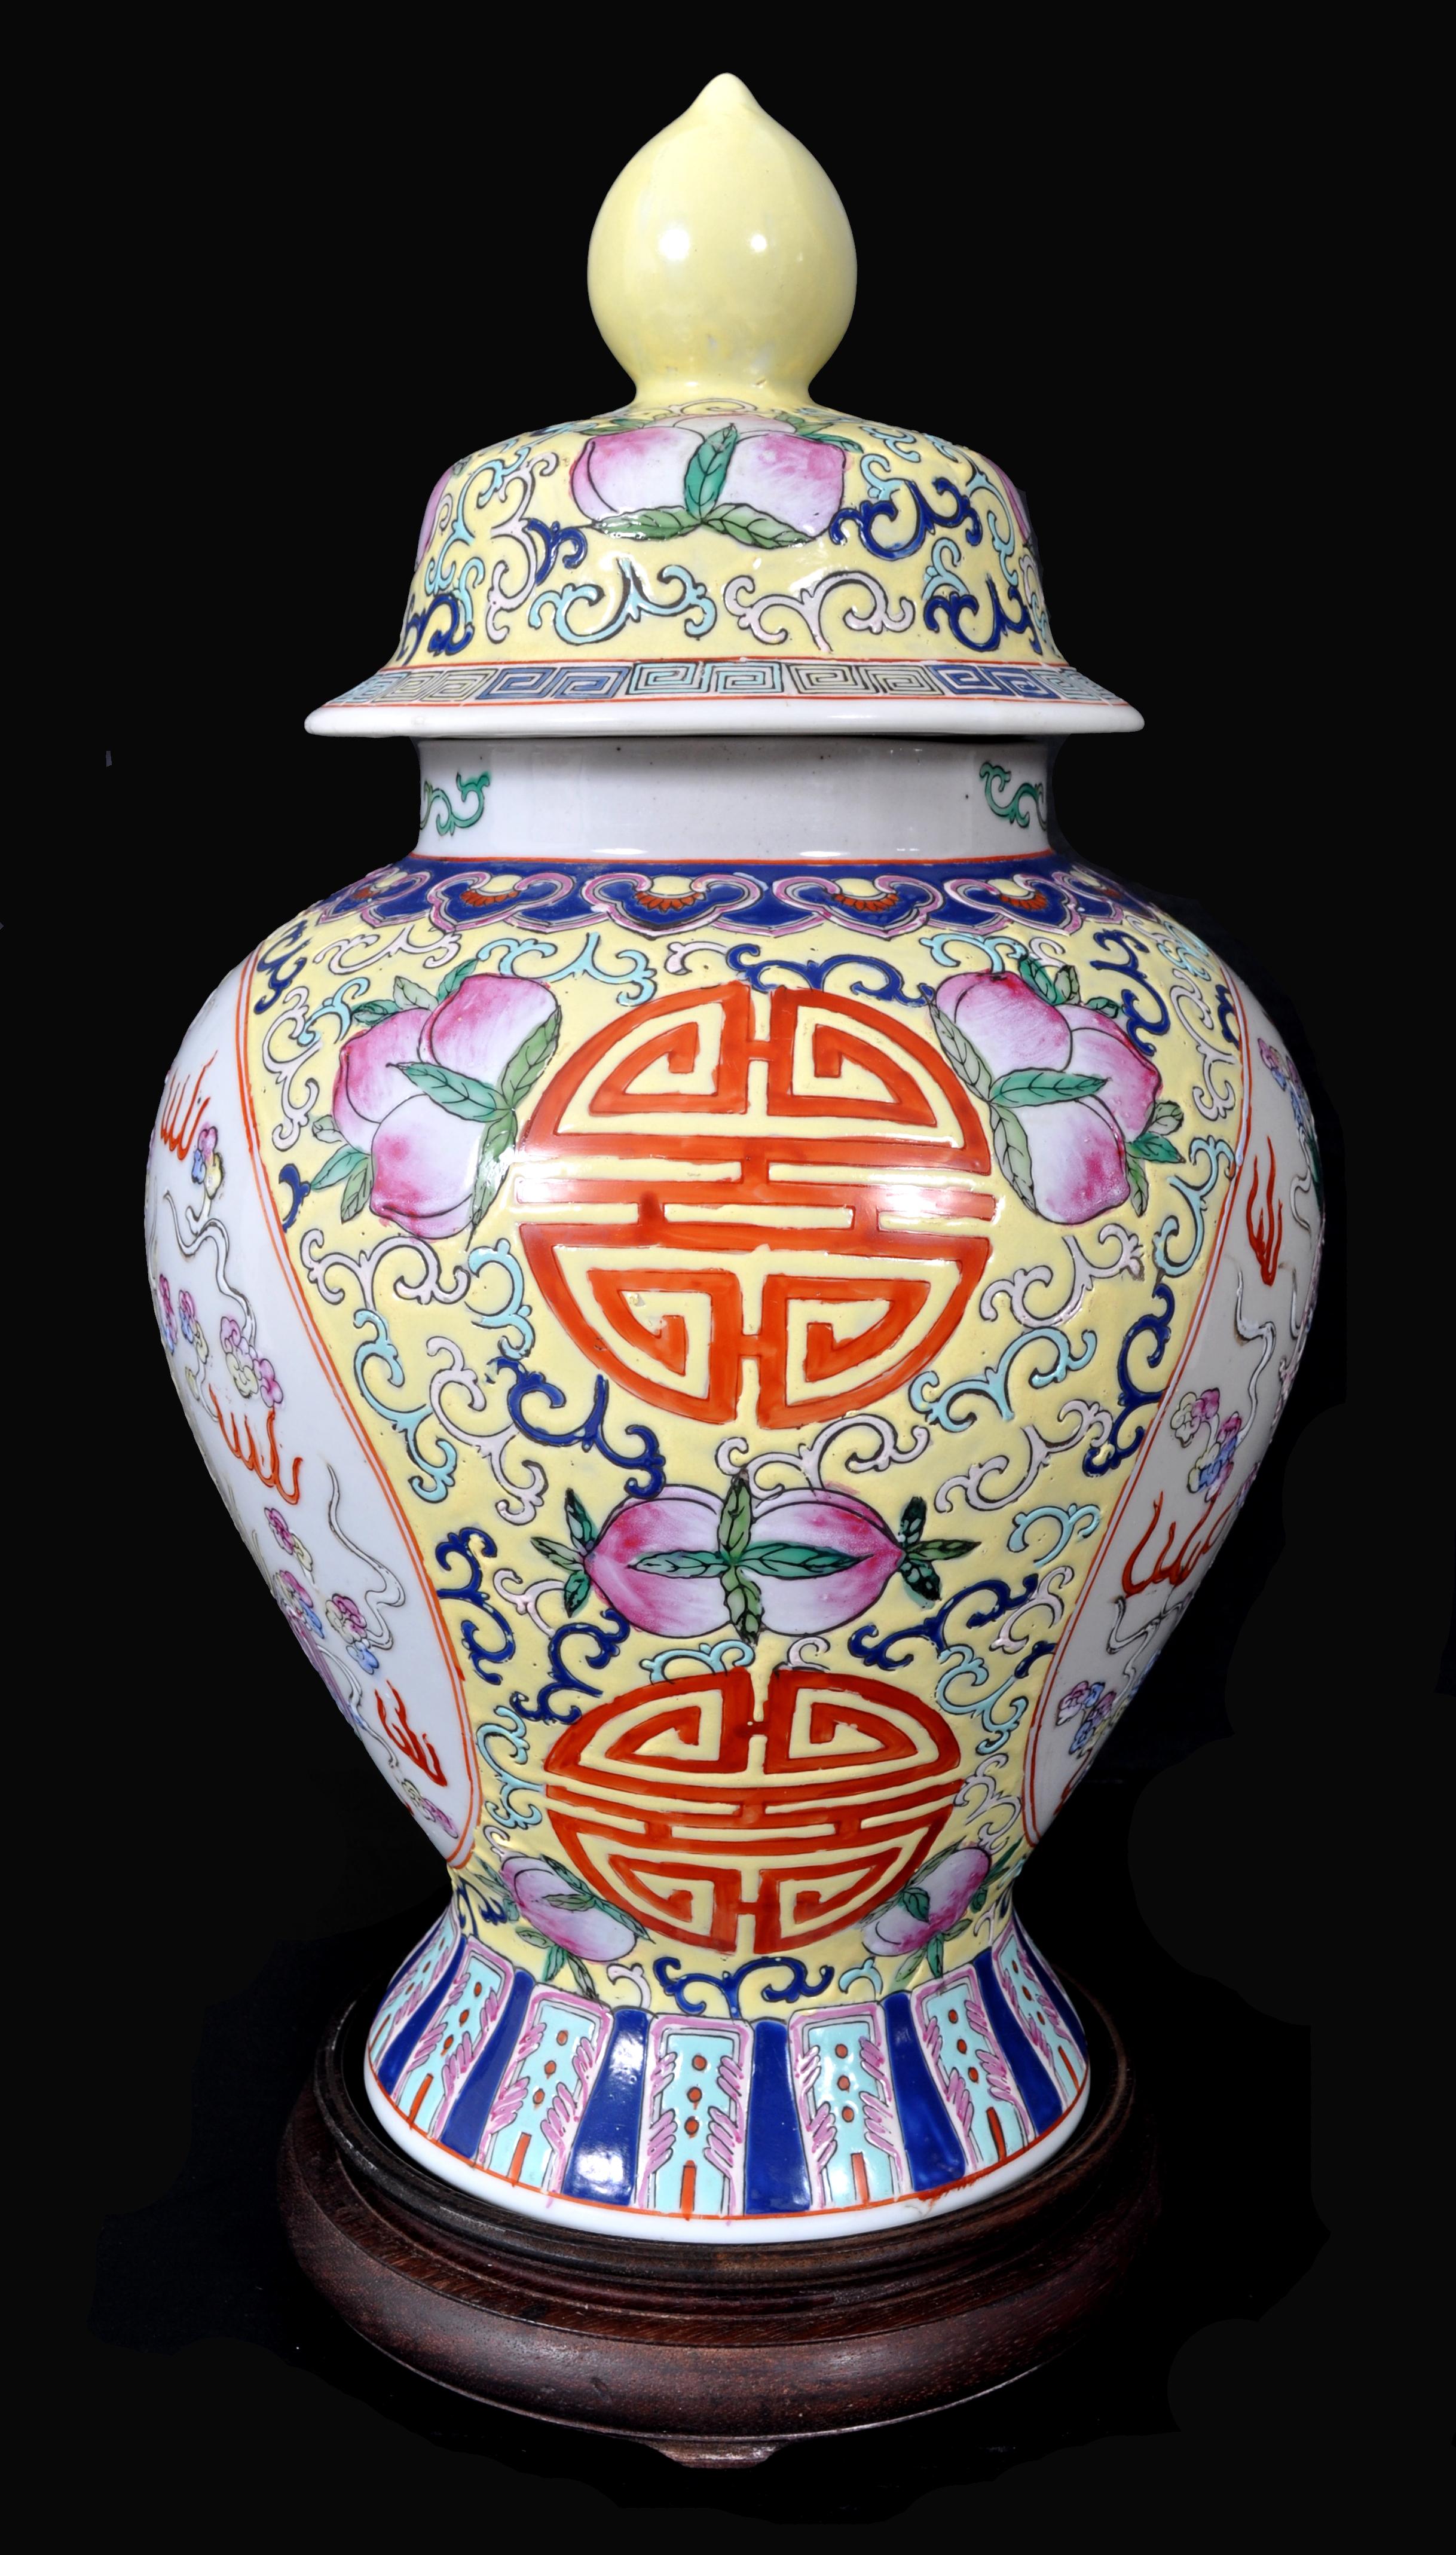 Antique 19th century Chinese Qing Dynasty imperial porcelain lidded ginger jar, circa 1880. The jar of large size and sumptuously decorated with enamels, the front of the vase portraying an Imperial five-toed dragon chasing a flaming pearl. The